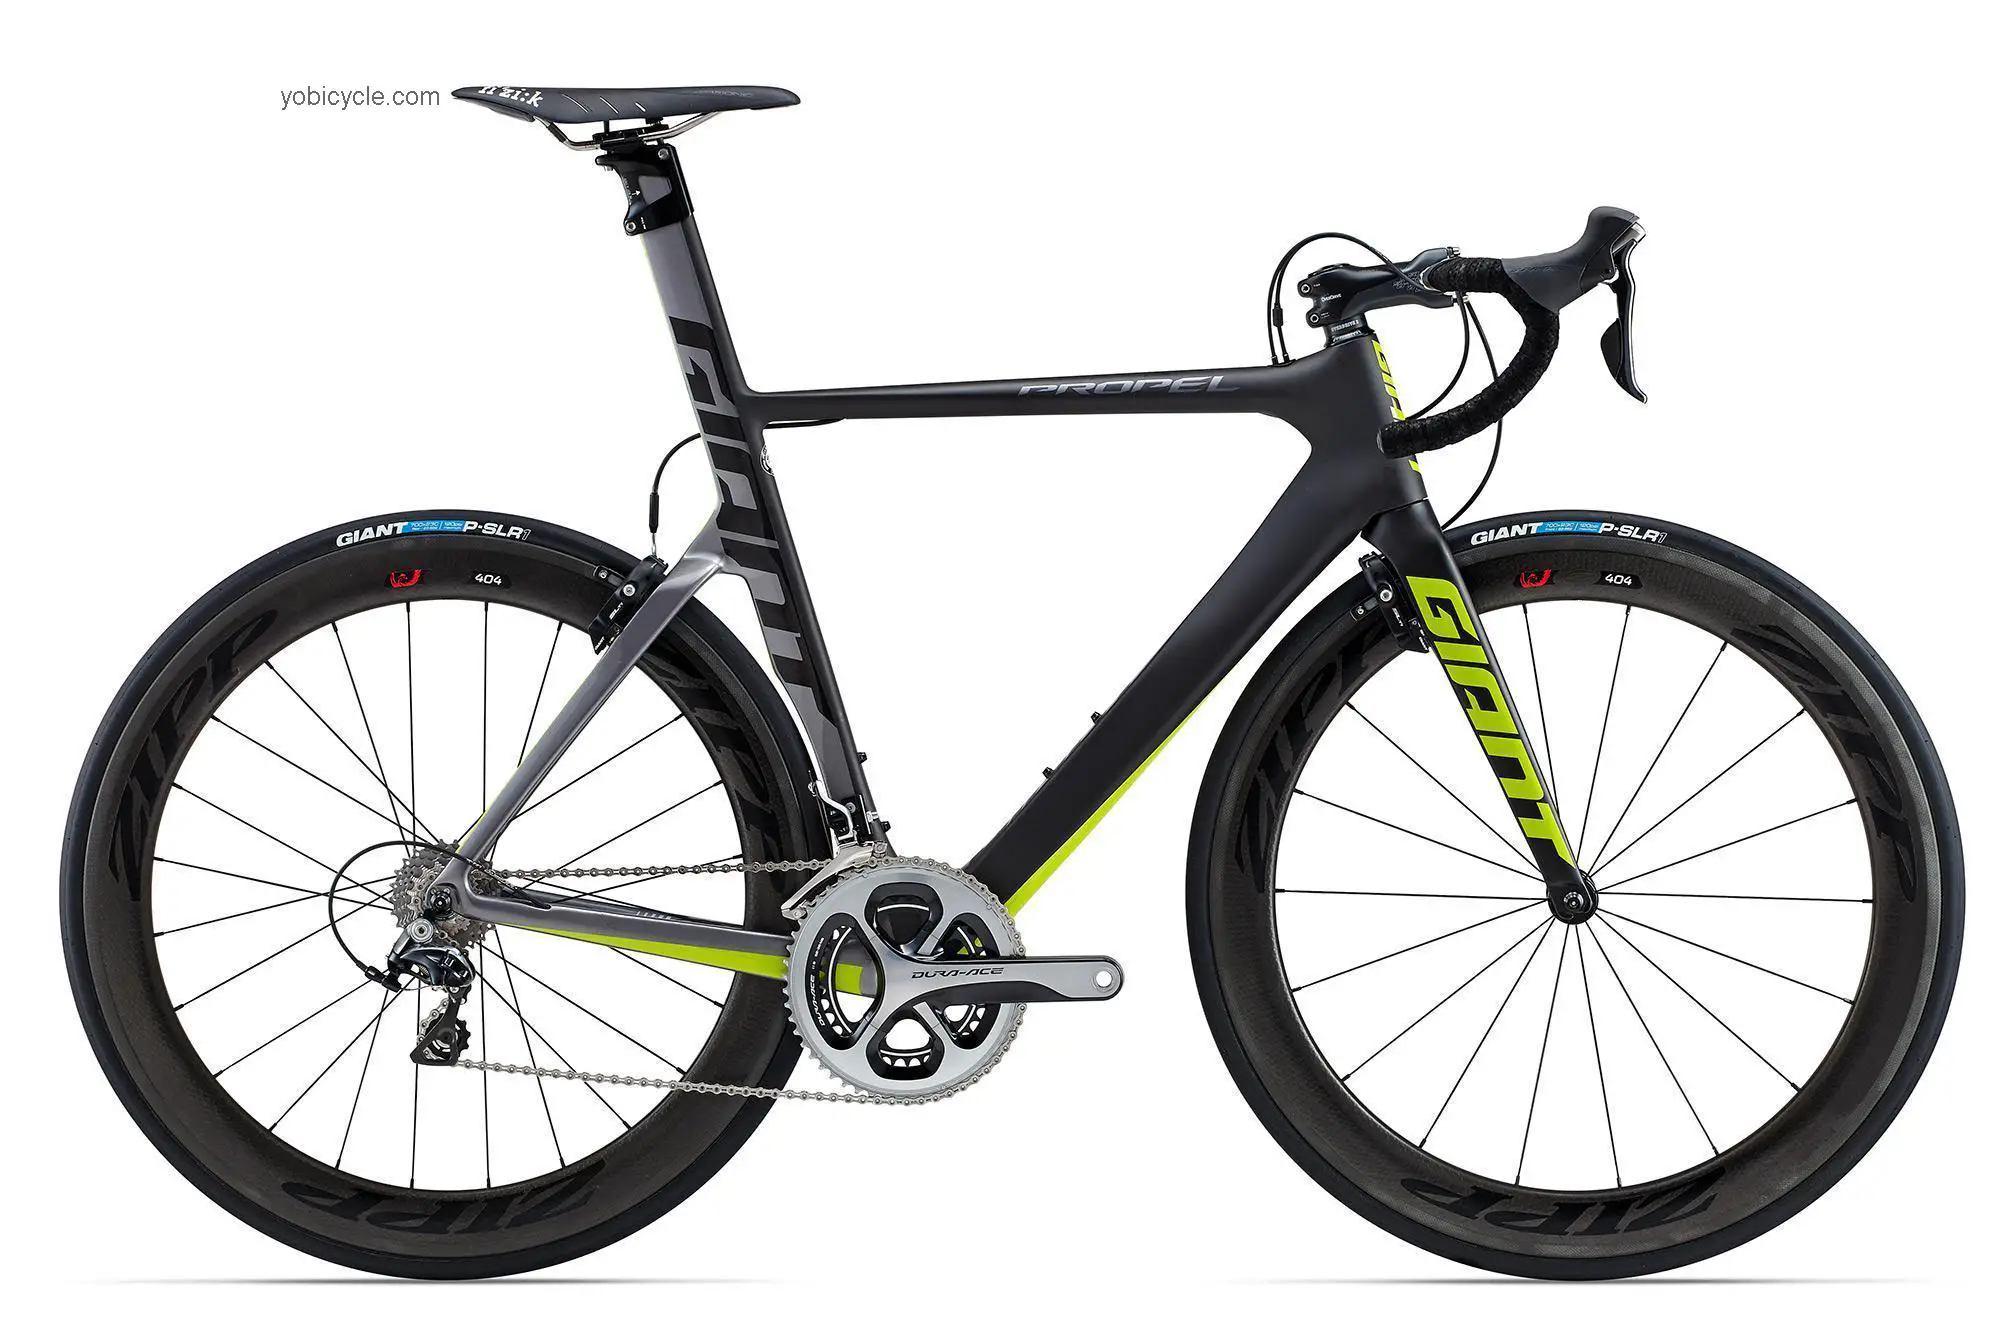 Giant Propel Advanced SL 1 2015 comparison online with competitors